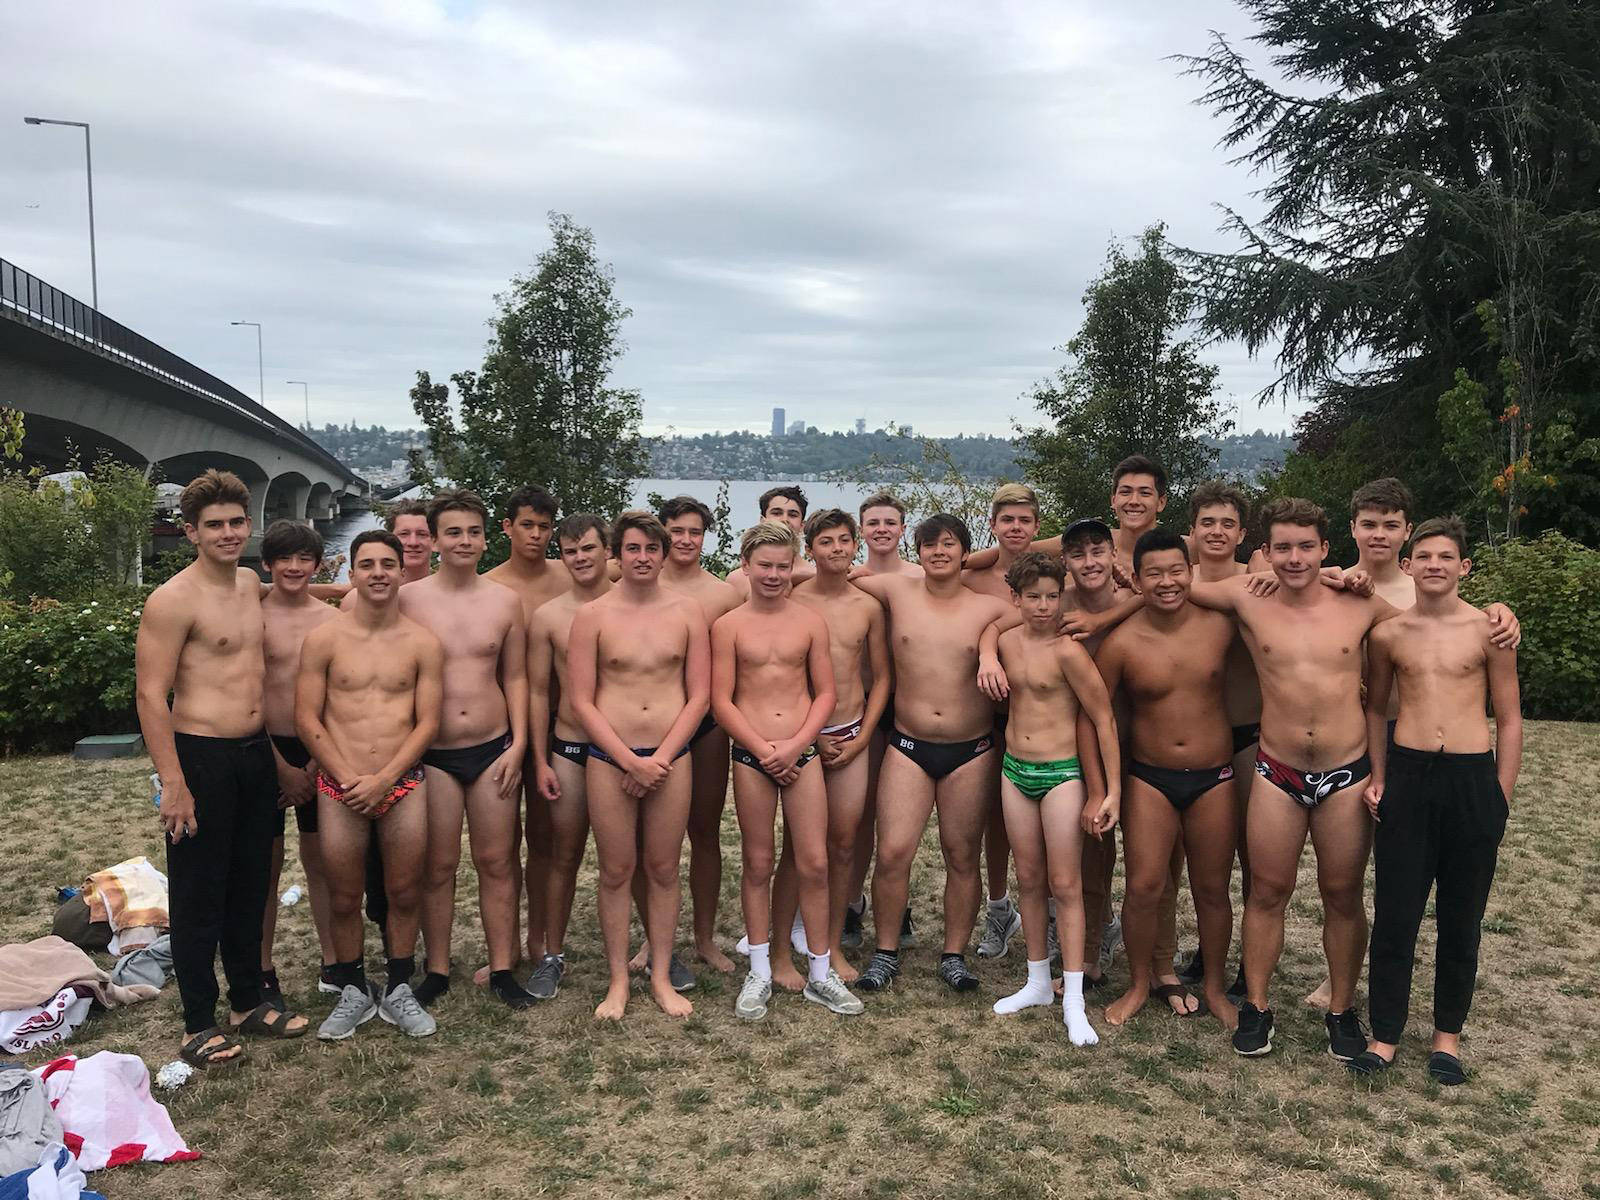 The Mercer Island boys water polo team is optimistic about the season. Photo courtesy of Chris Vacca